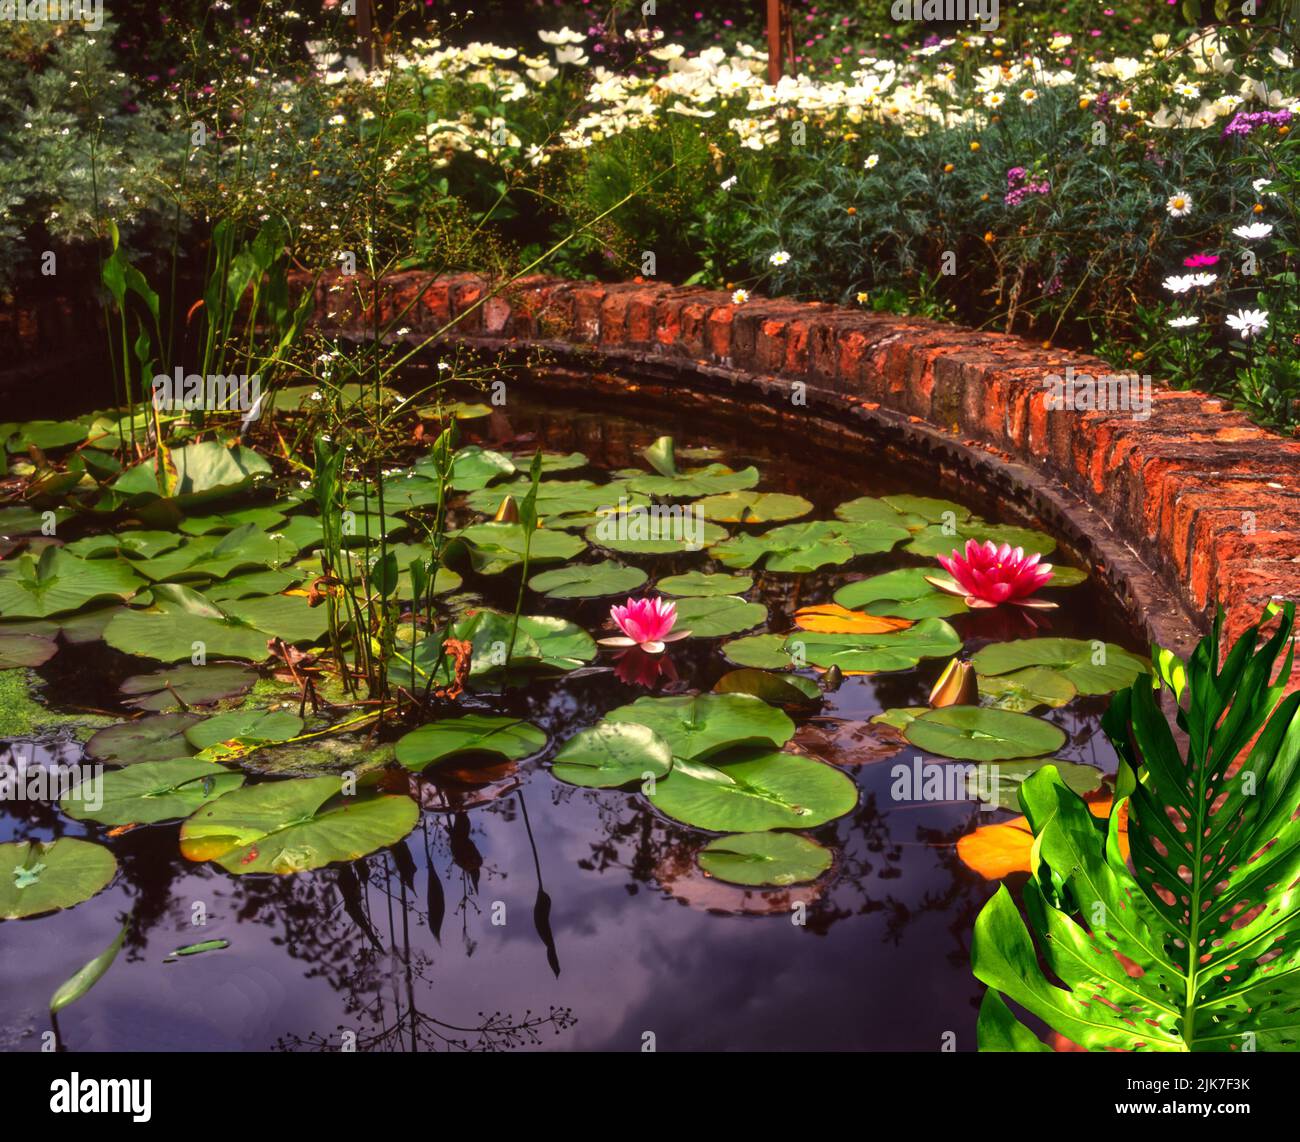 Garden pond surrounded by a brick wall Stock Photo